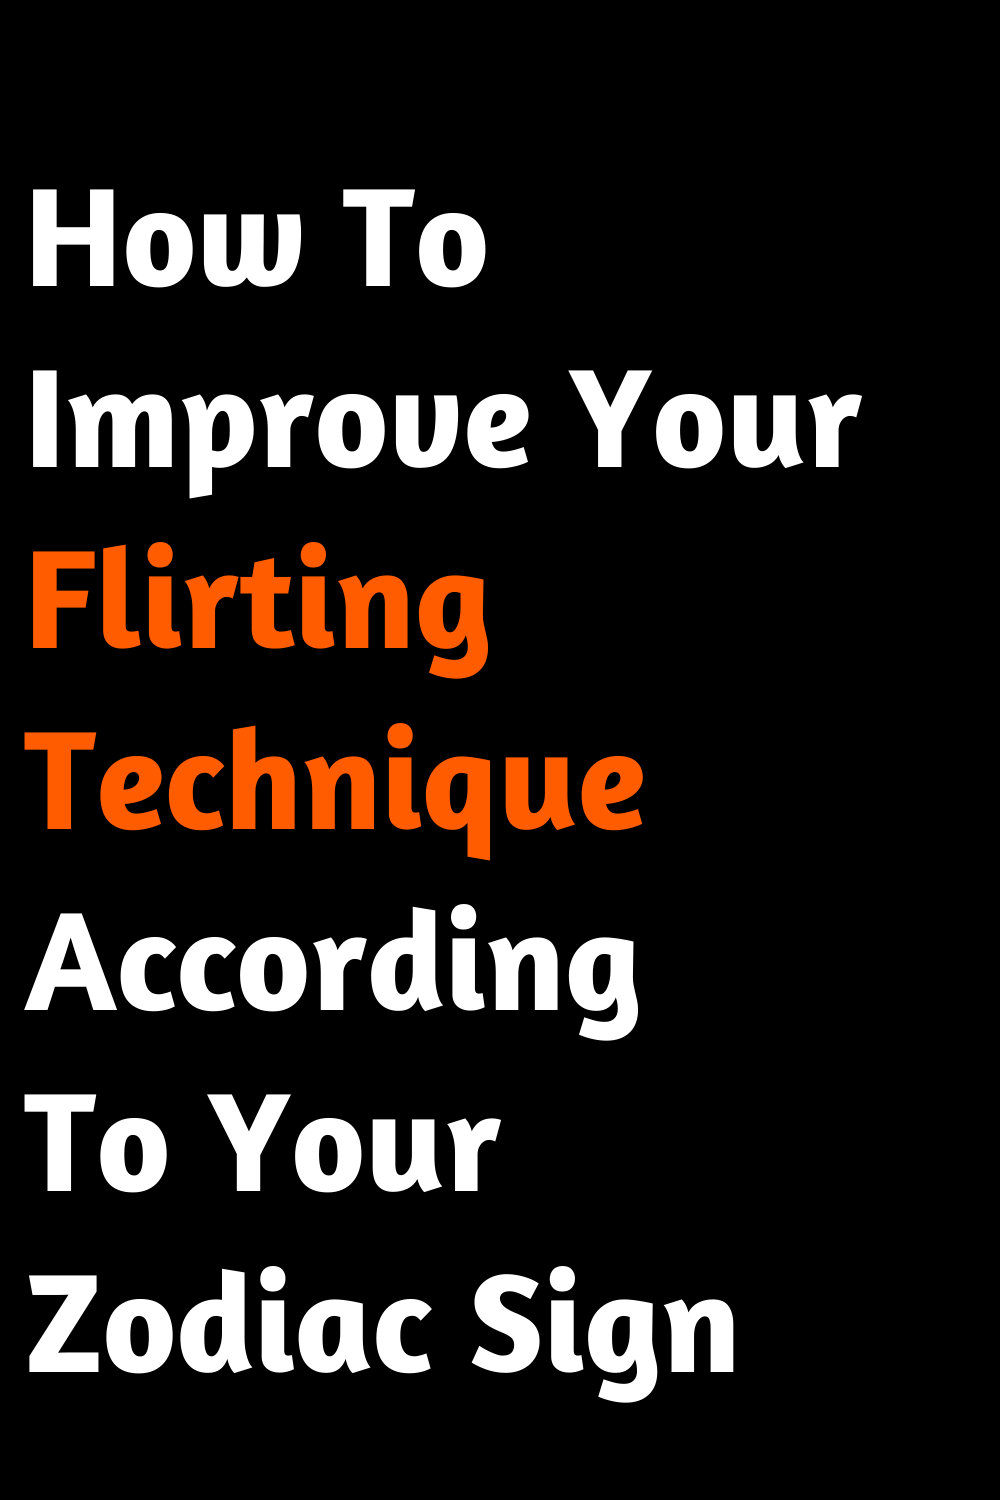 How To Improve Your Flirting Technique According To Your Zodiac Sign